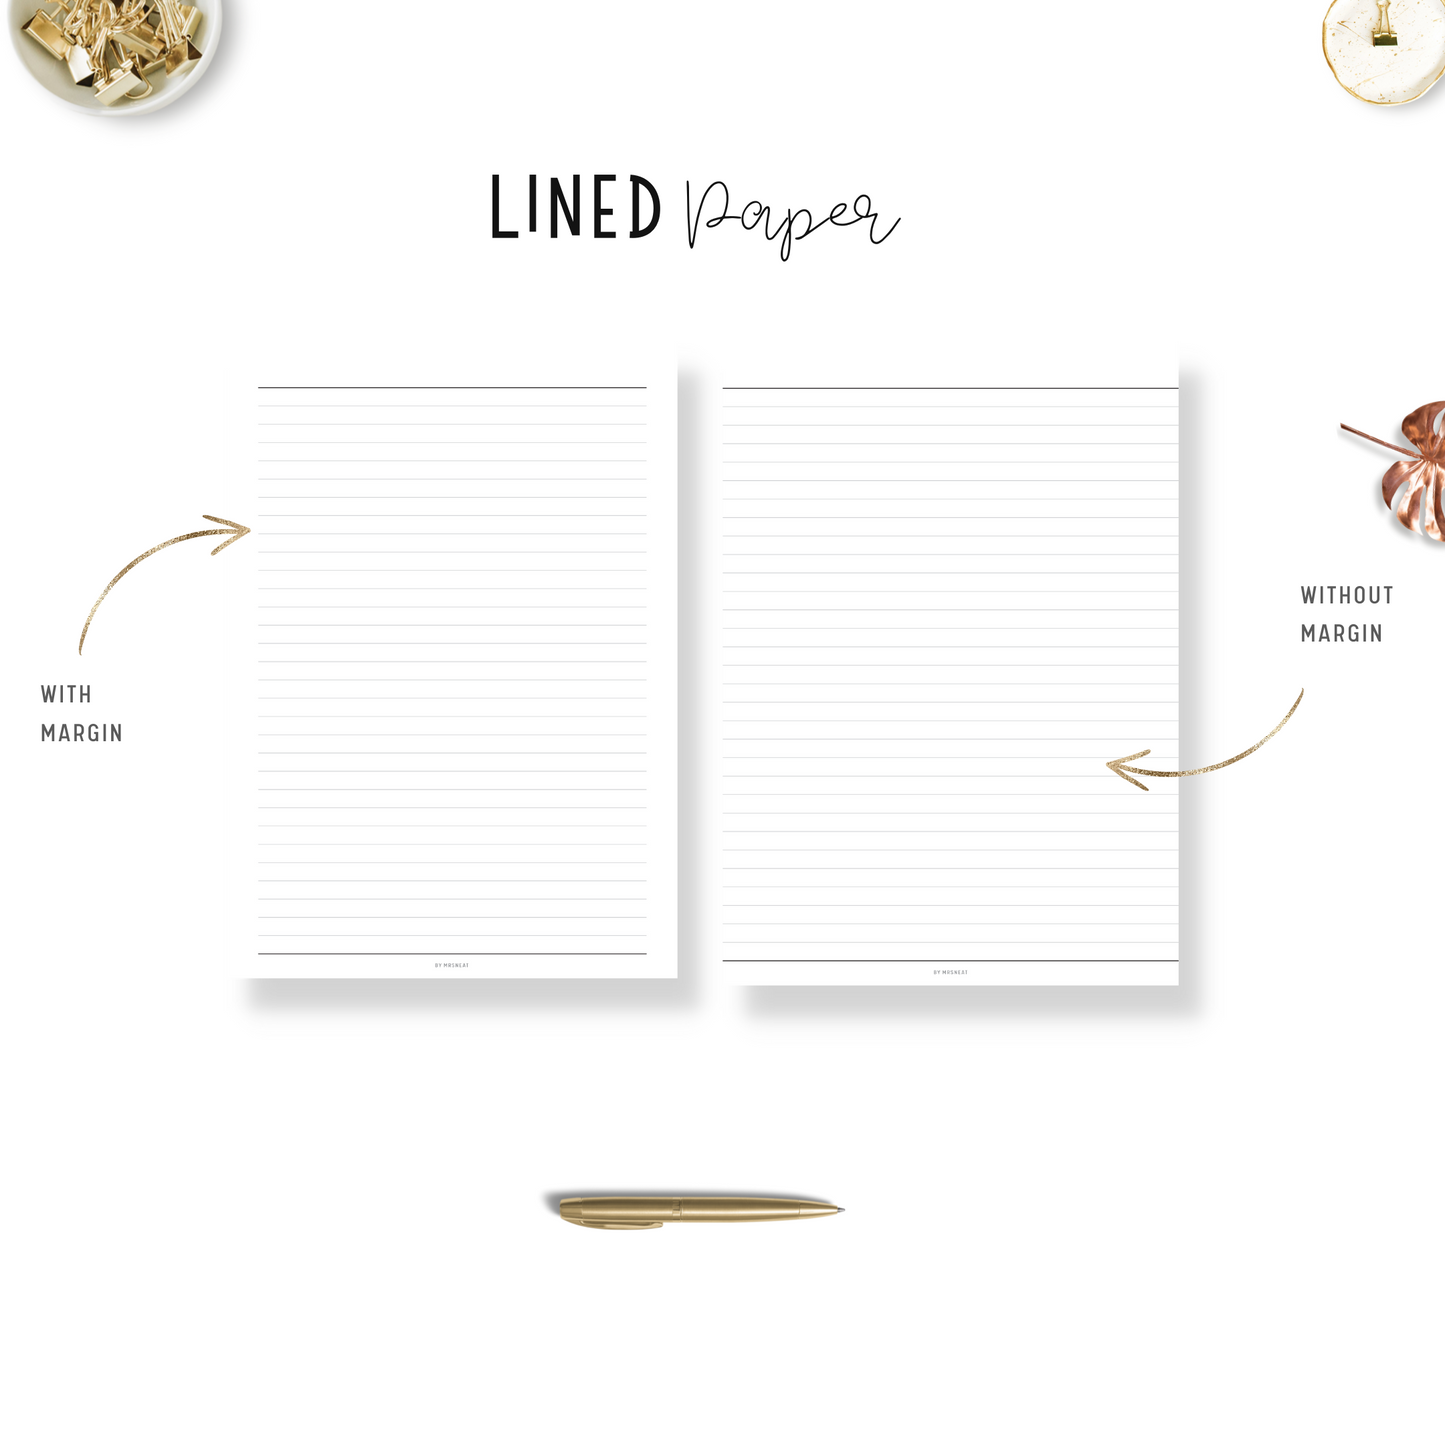 Clean and minimalist lined paper with and without margin